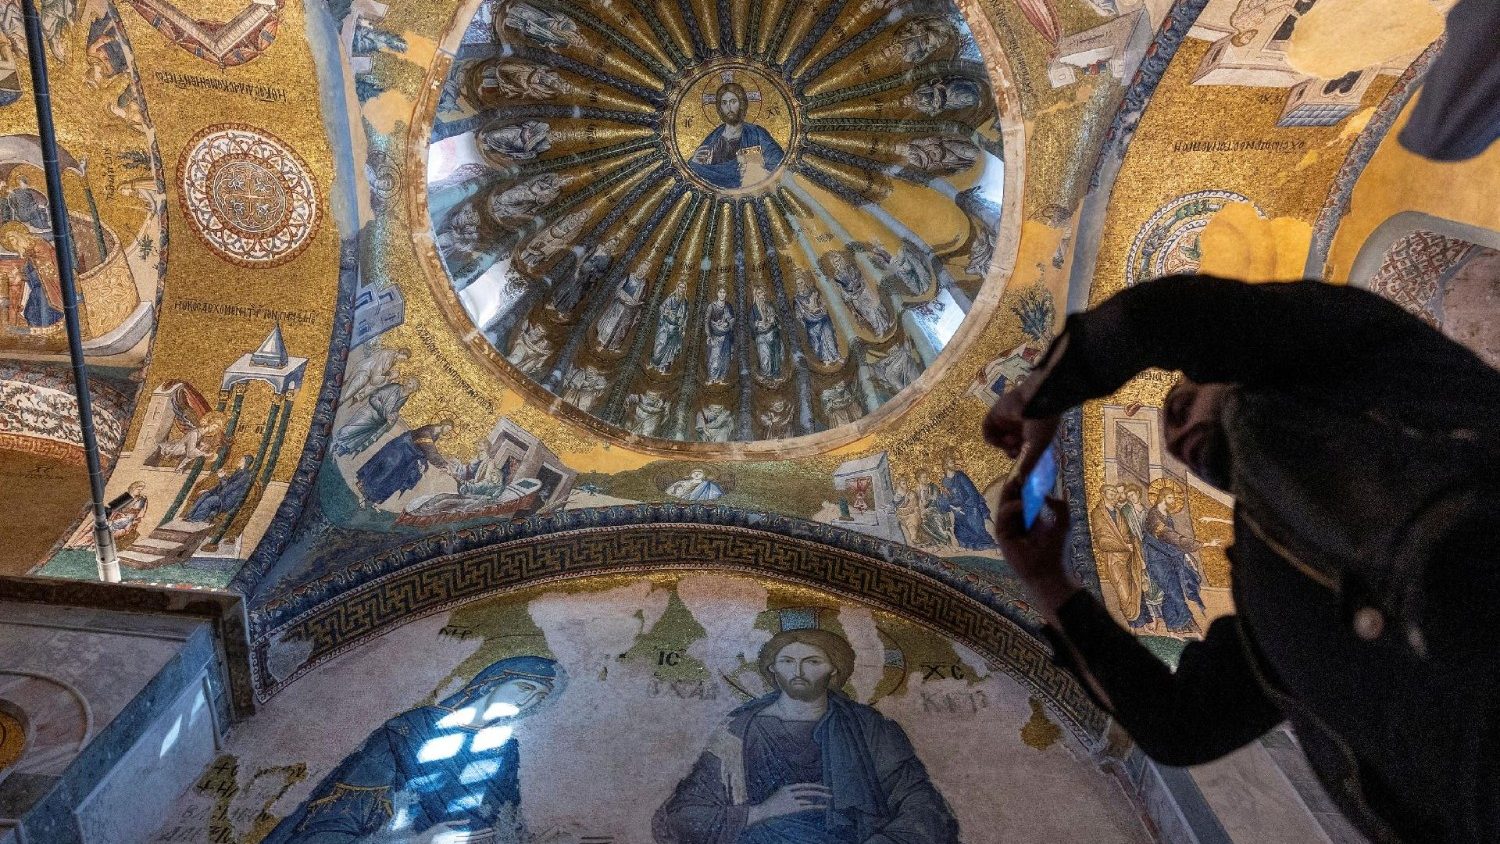 EU bishops deplore conversion of Istanbul Orthodox church into mosque